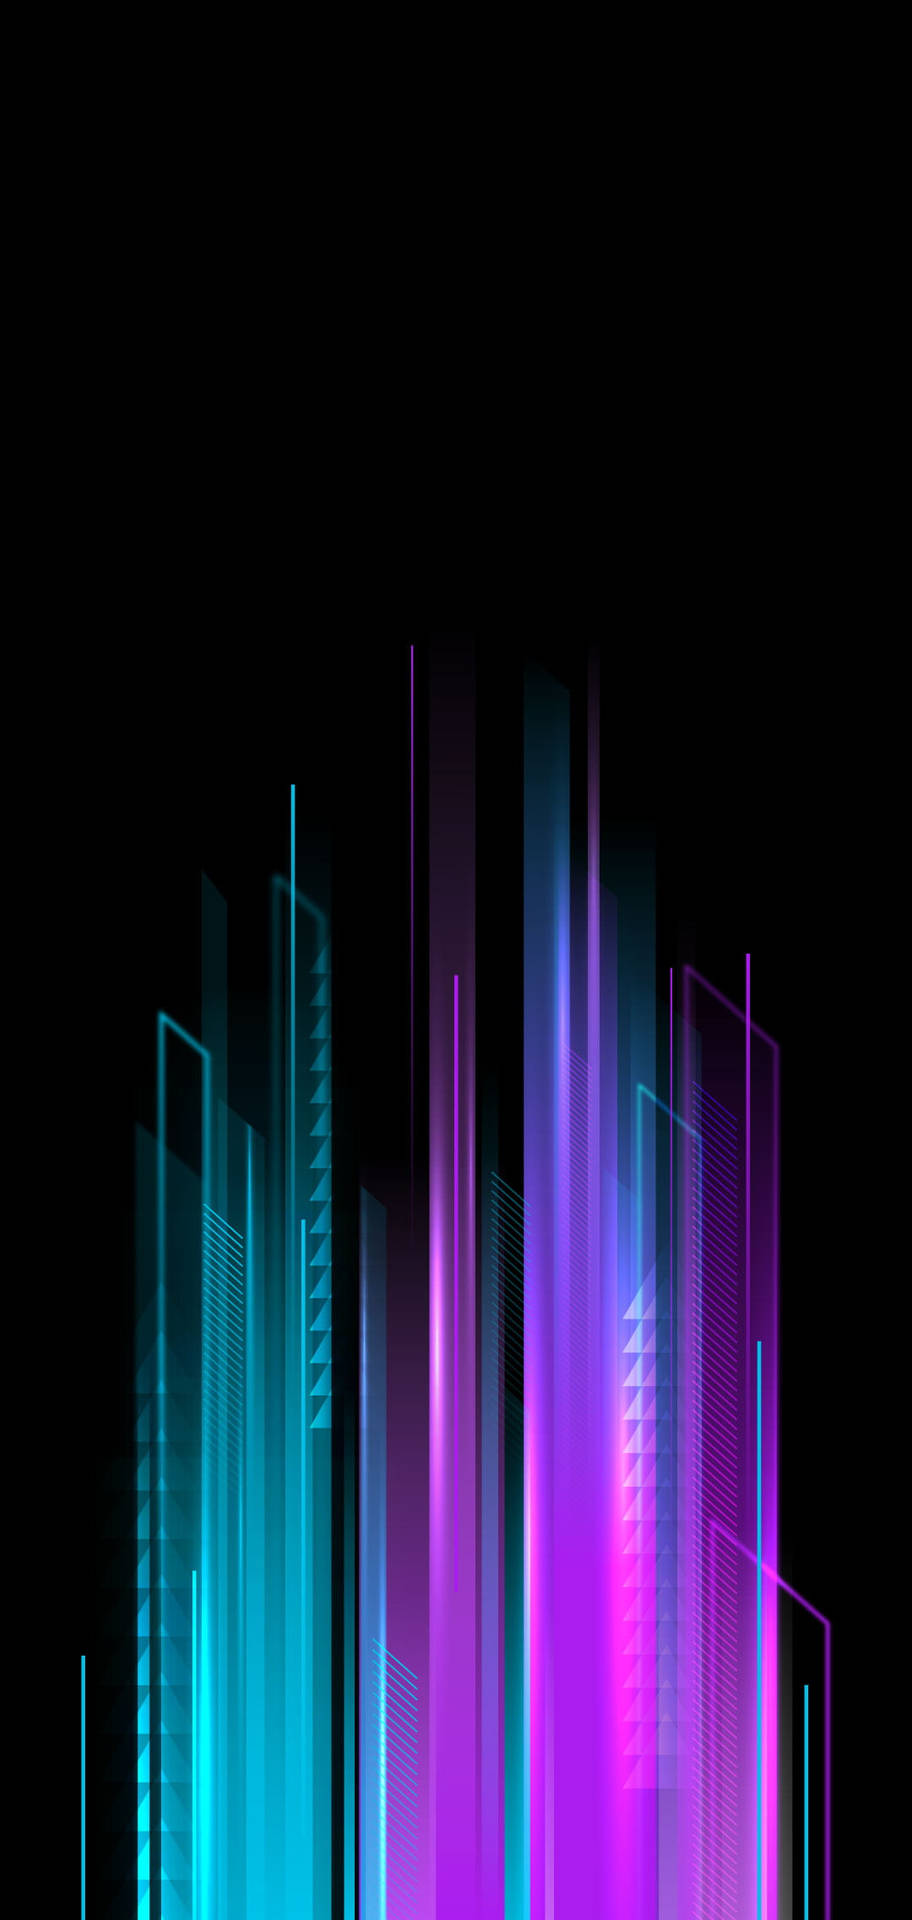 Dark Neon Purple And Teal Aesthetic Image Background